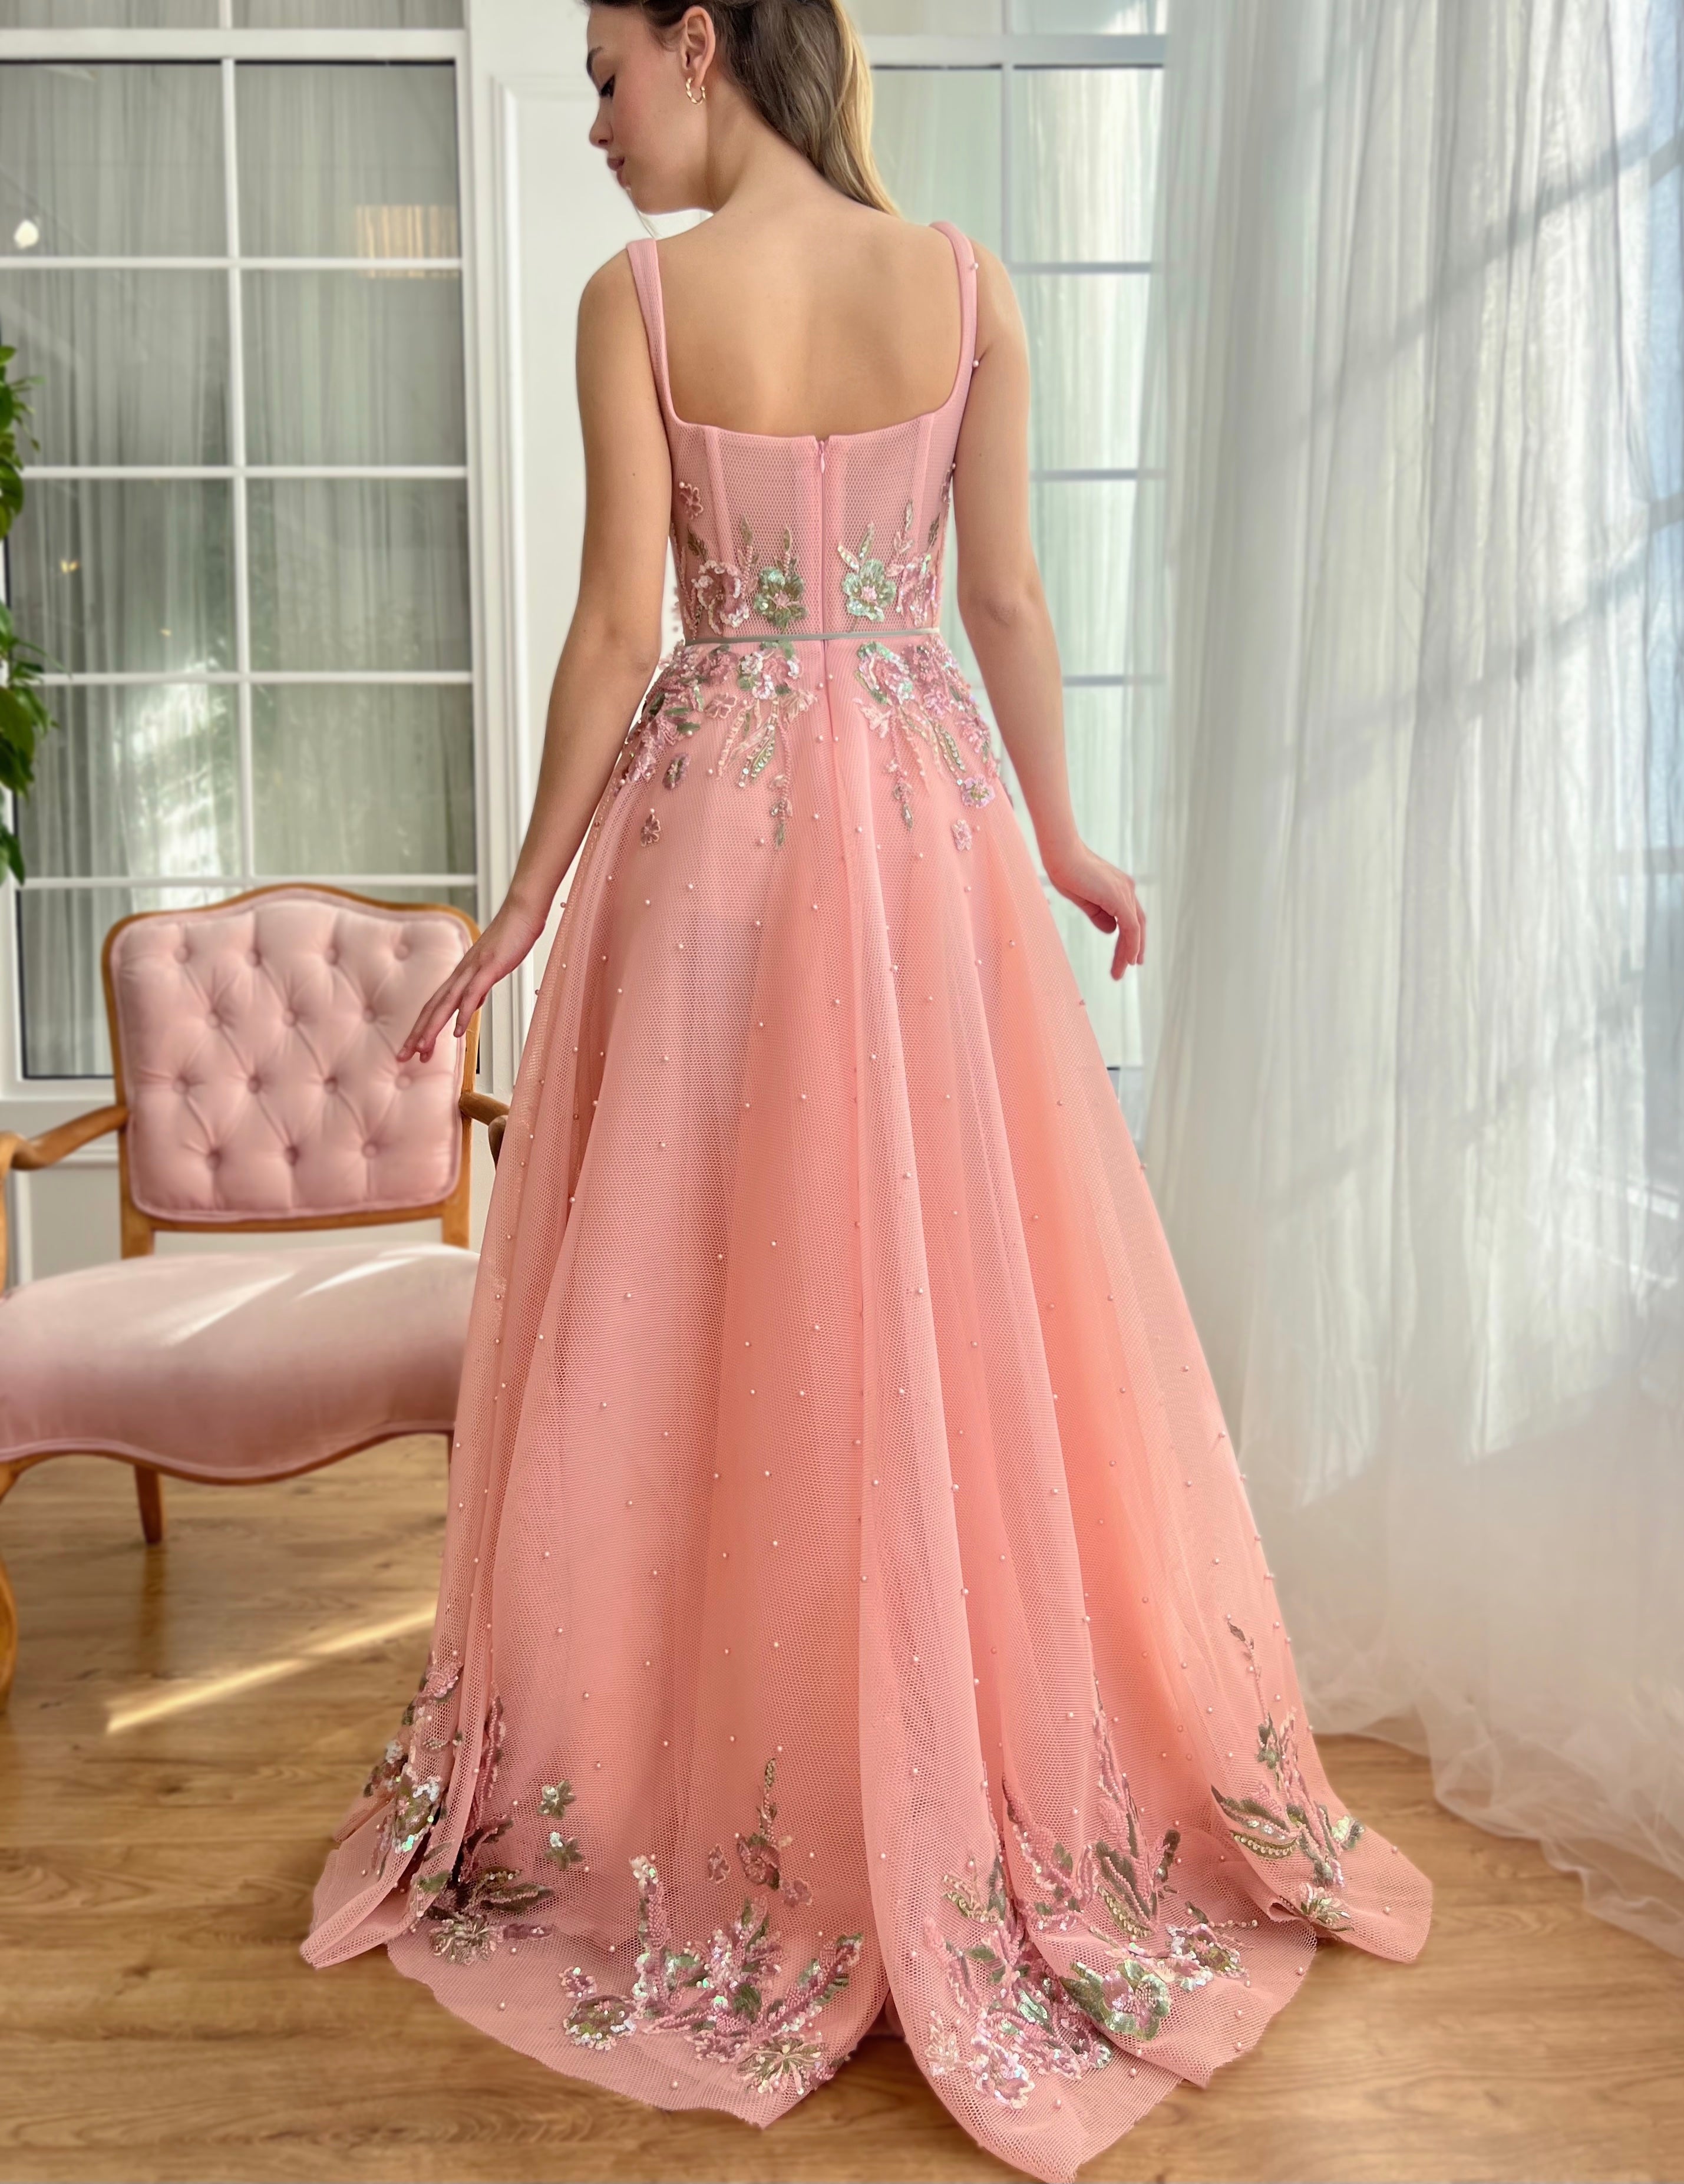 Pink A-Line dress with embroidery, beading and straps